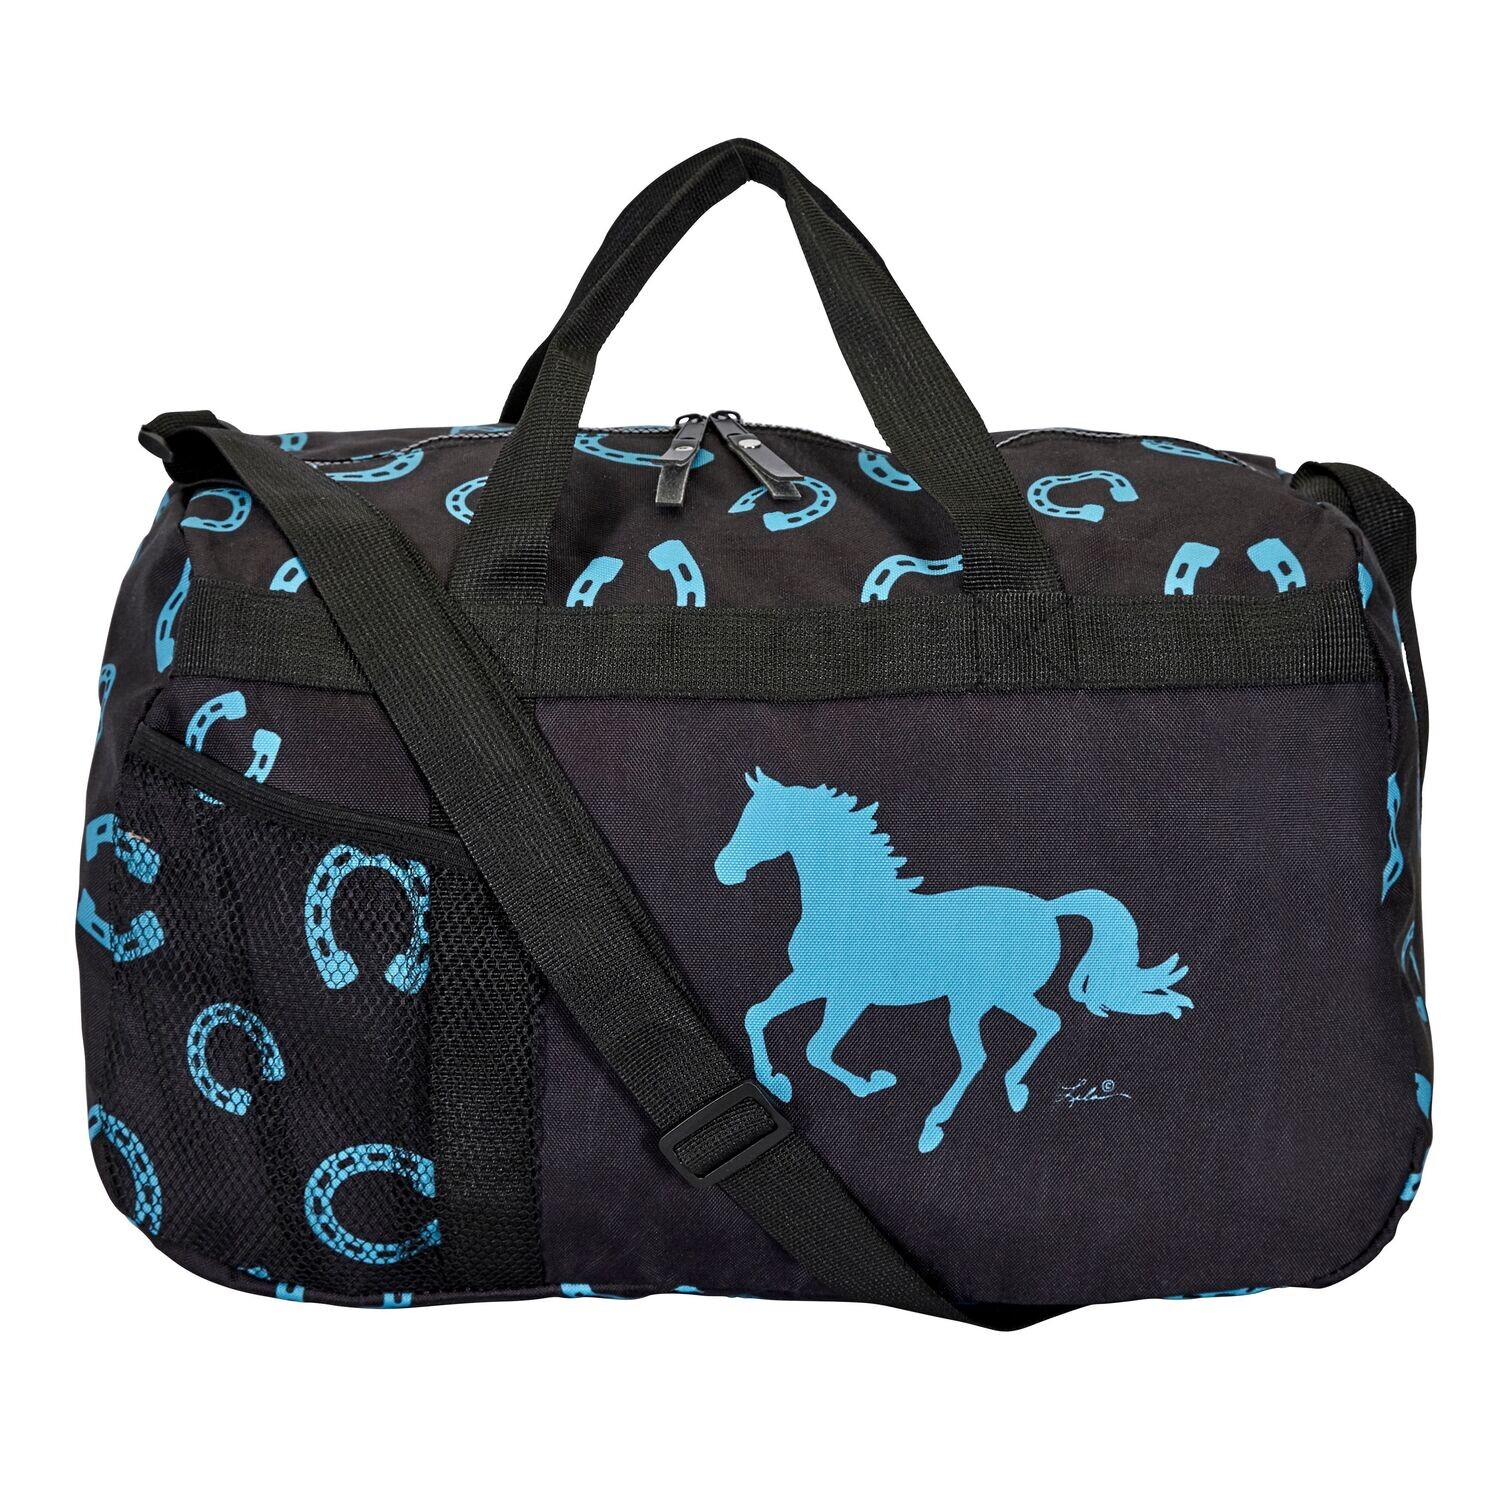 Duffle Bag - Teal Horse with Horseshoes